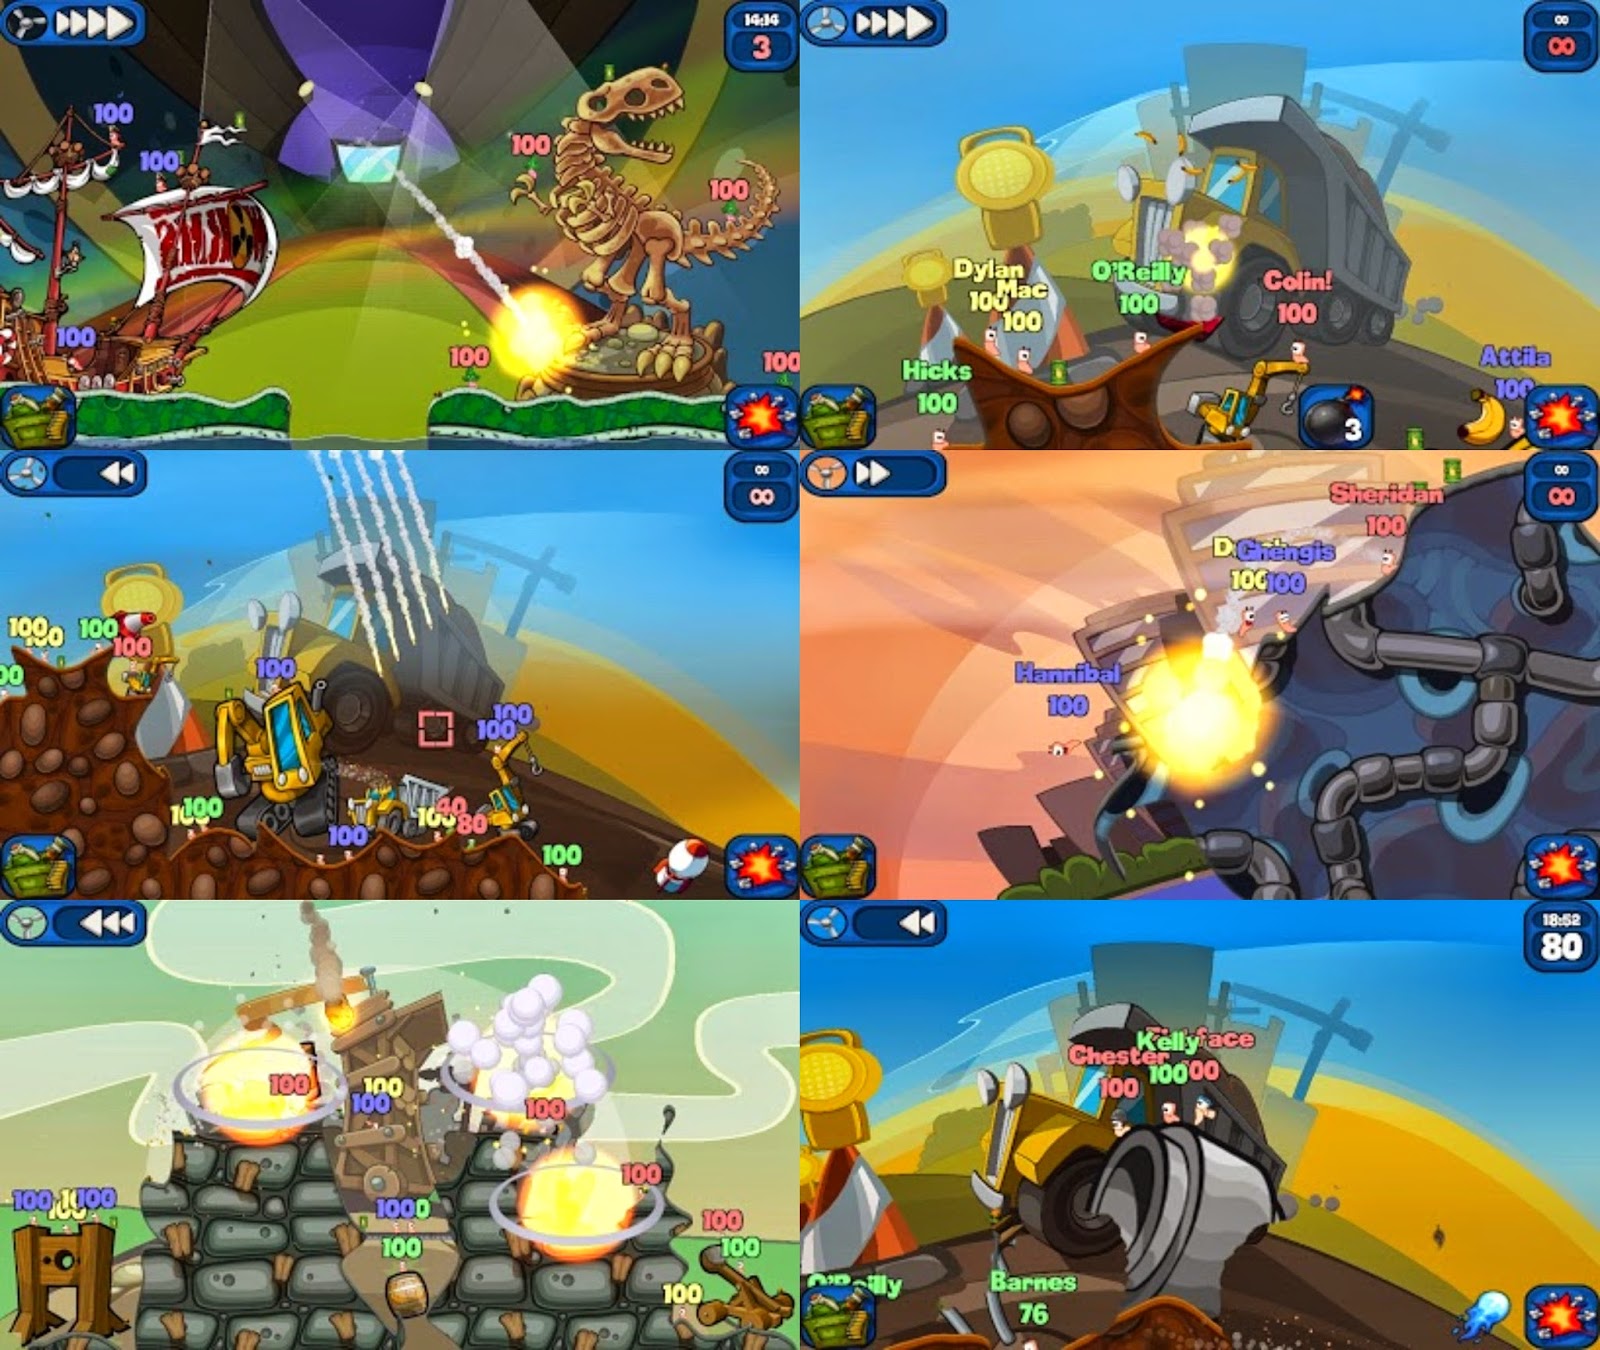 Worms 2 Armageddon Apk Data v1.4.1 For Android